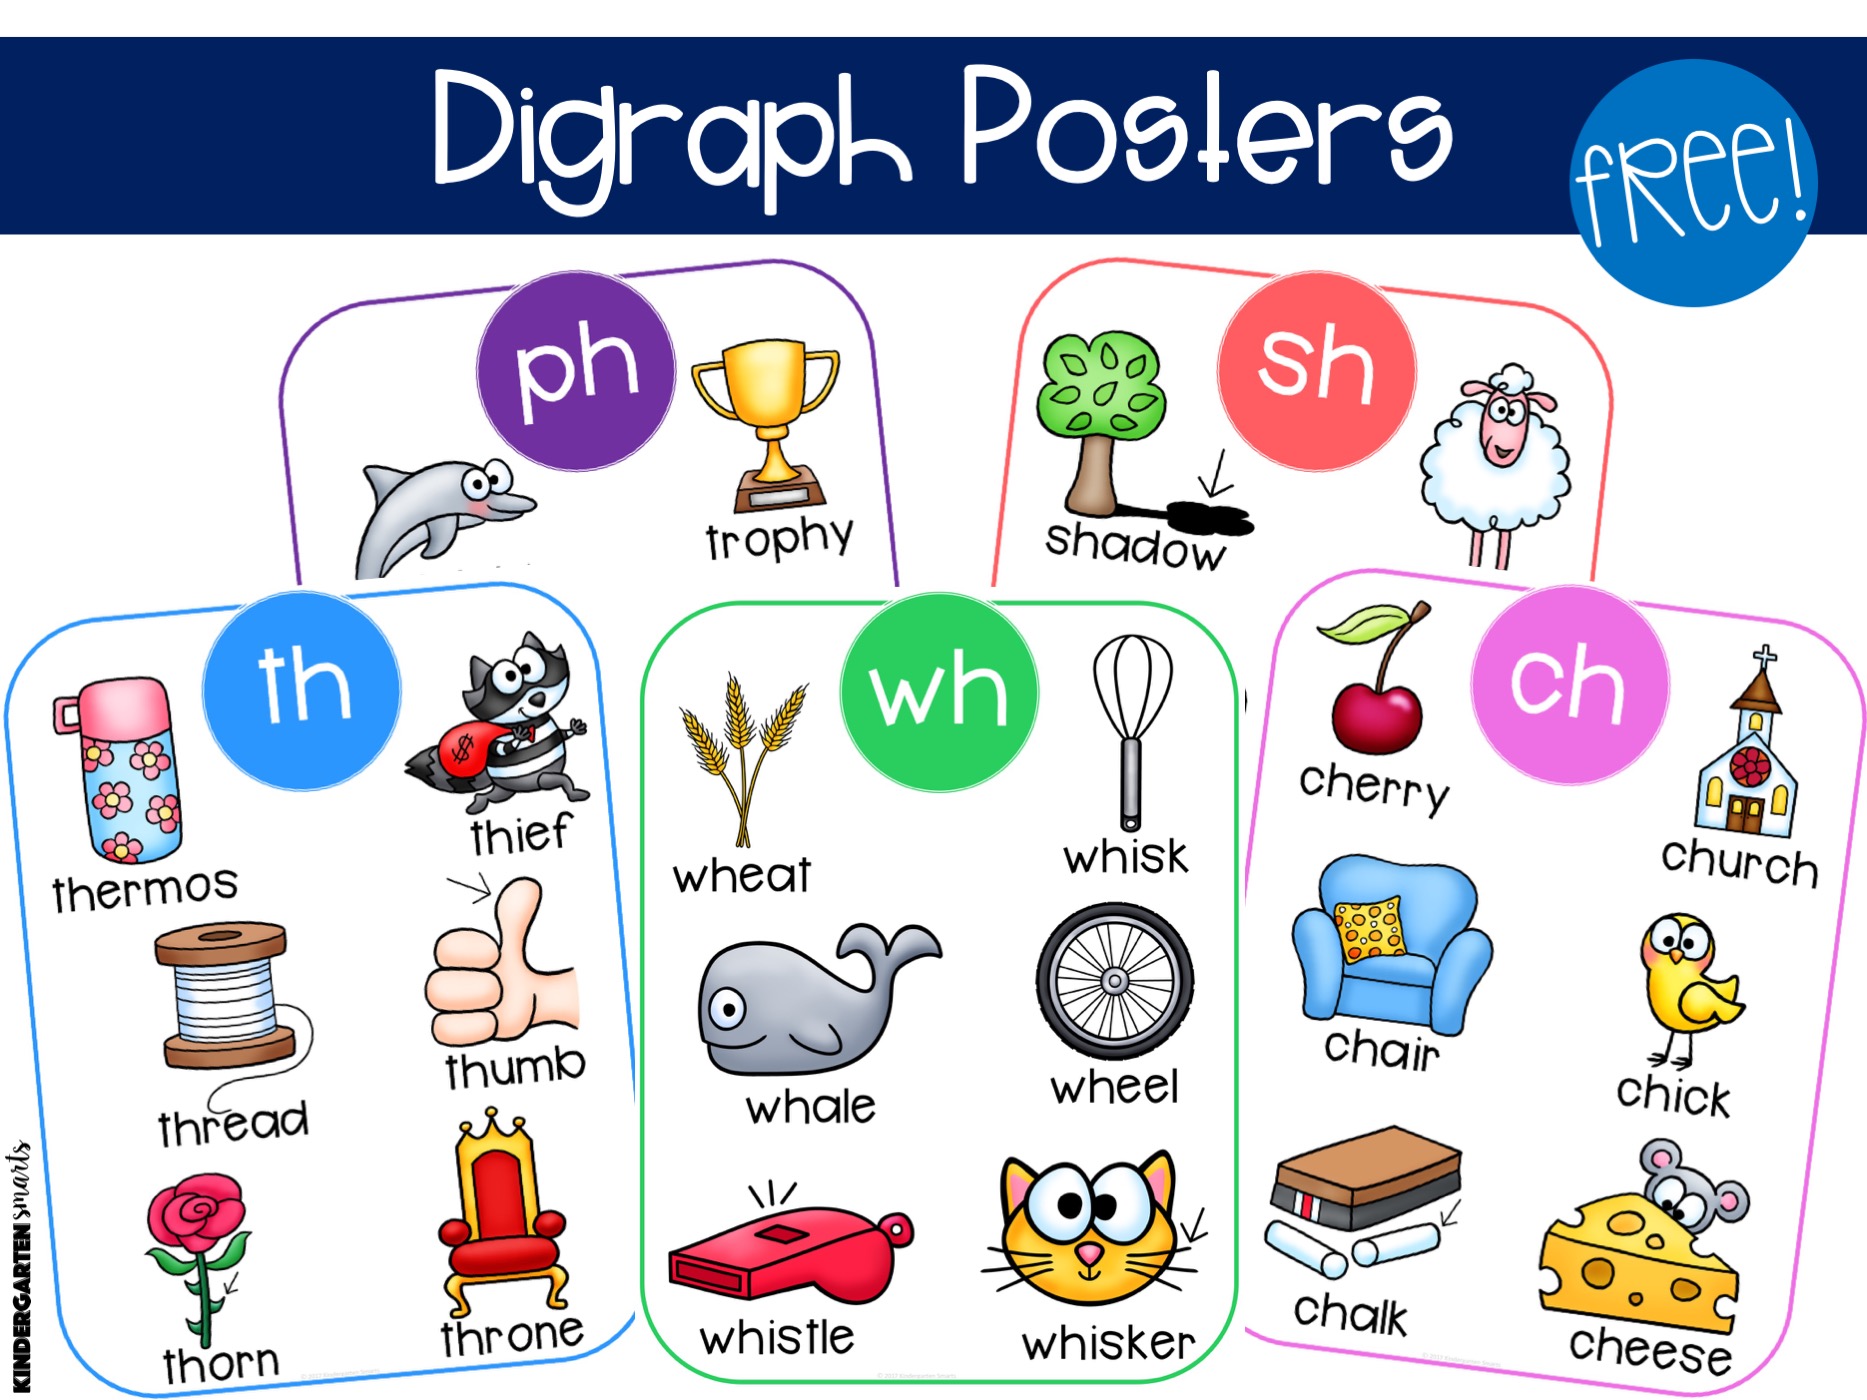 consonant-digraphs-how-to-teach-them-in-5-steps-kindergarten-smarts